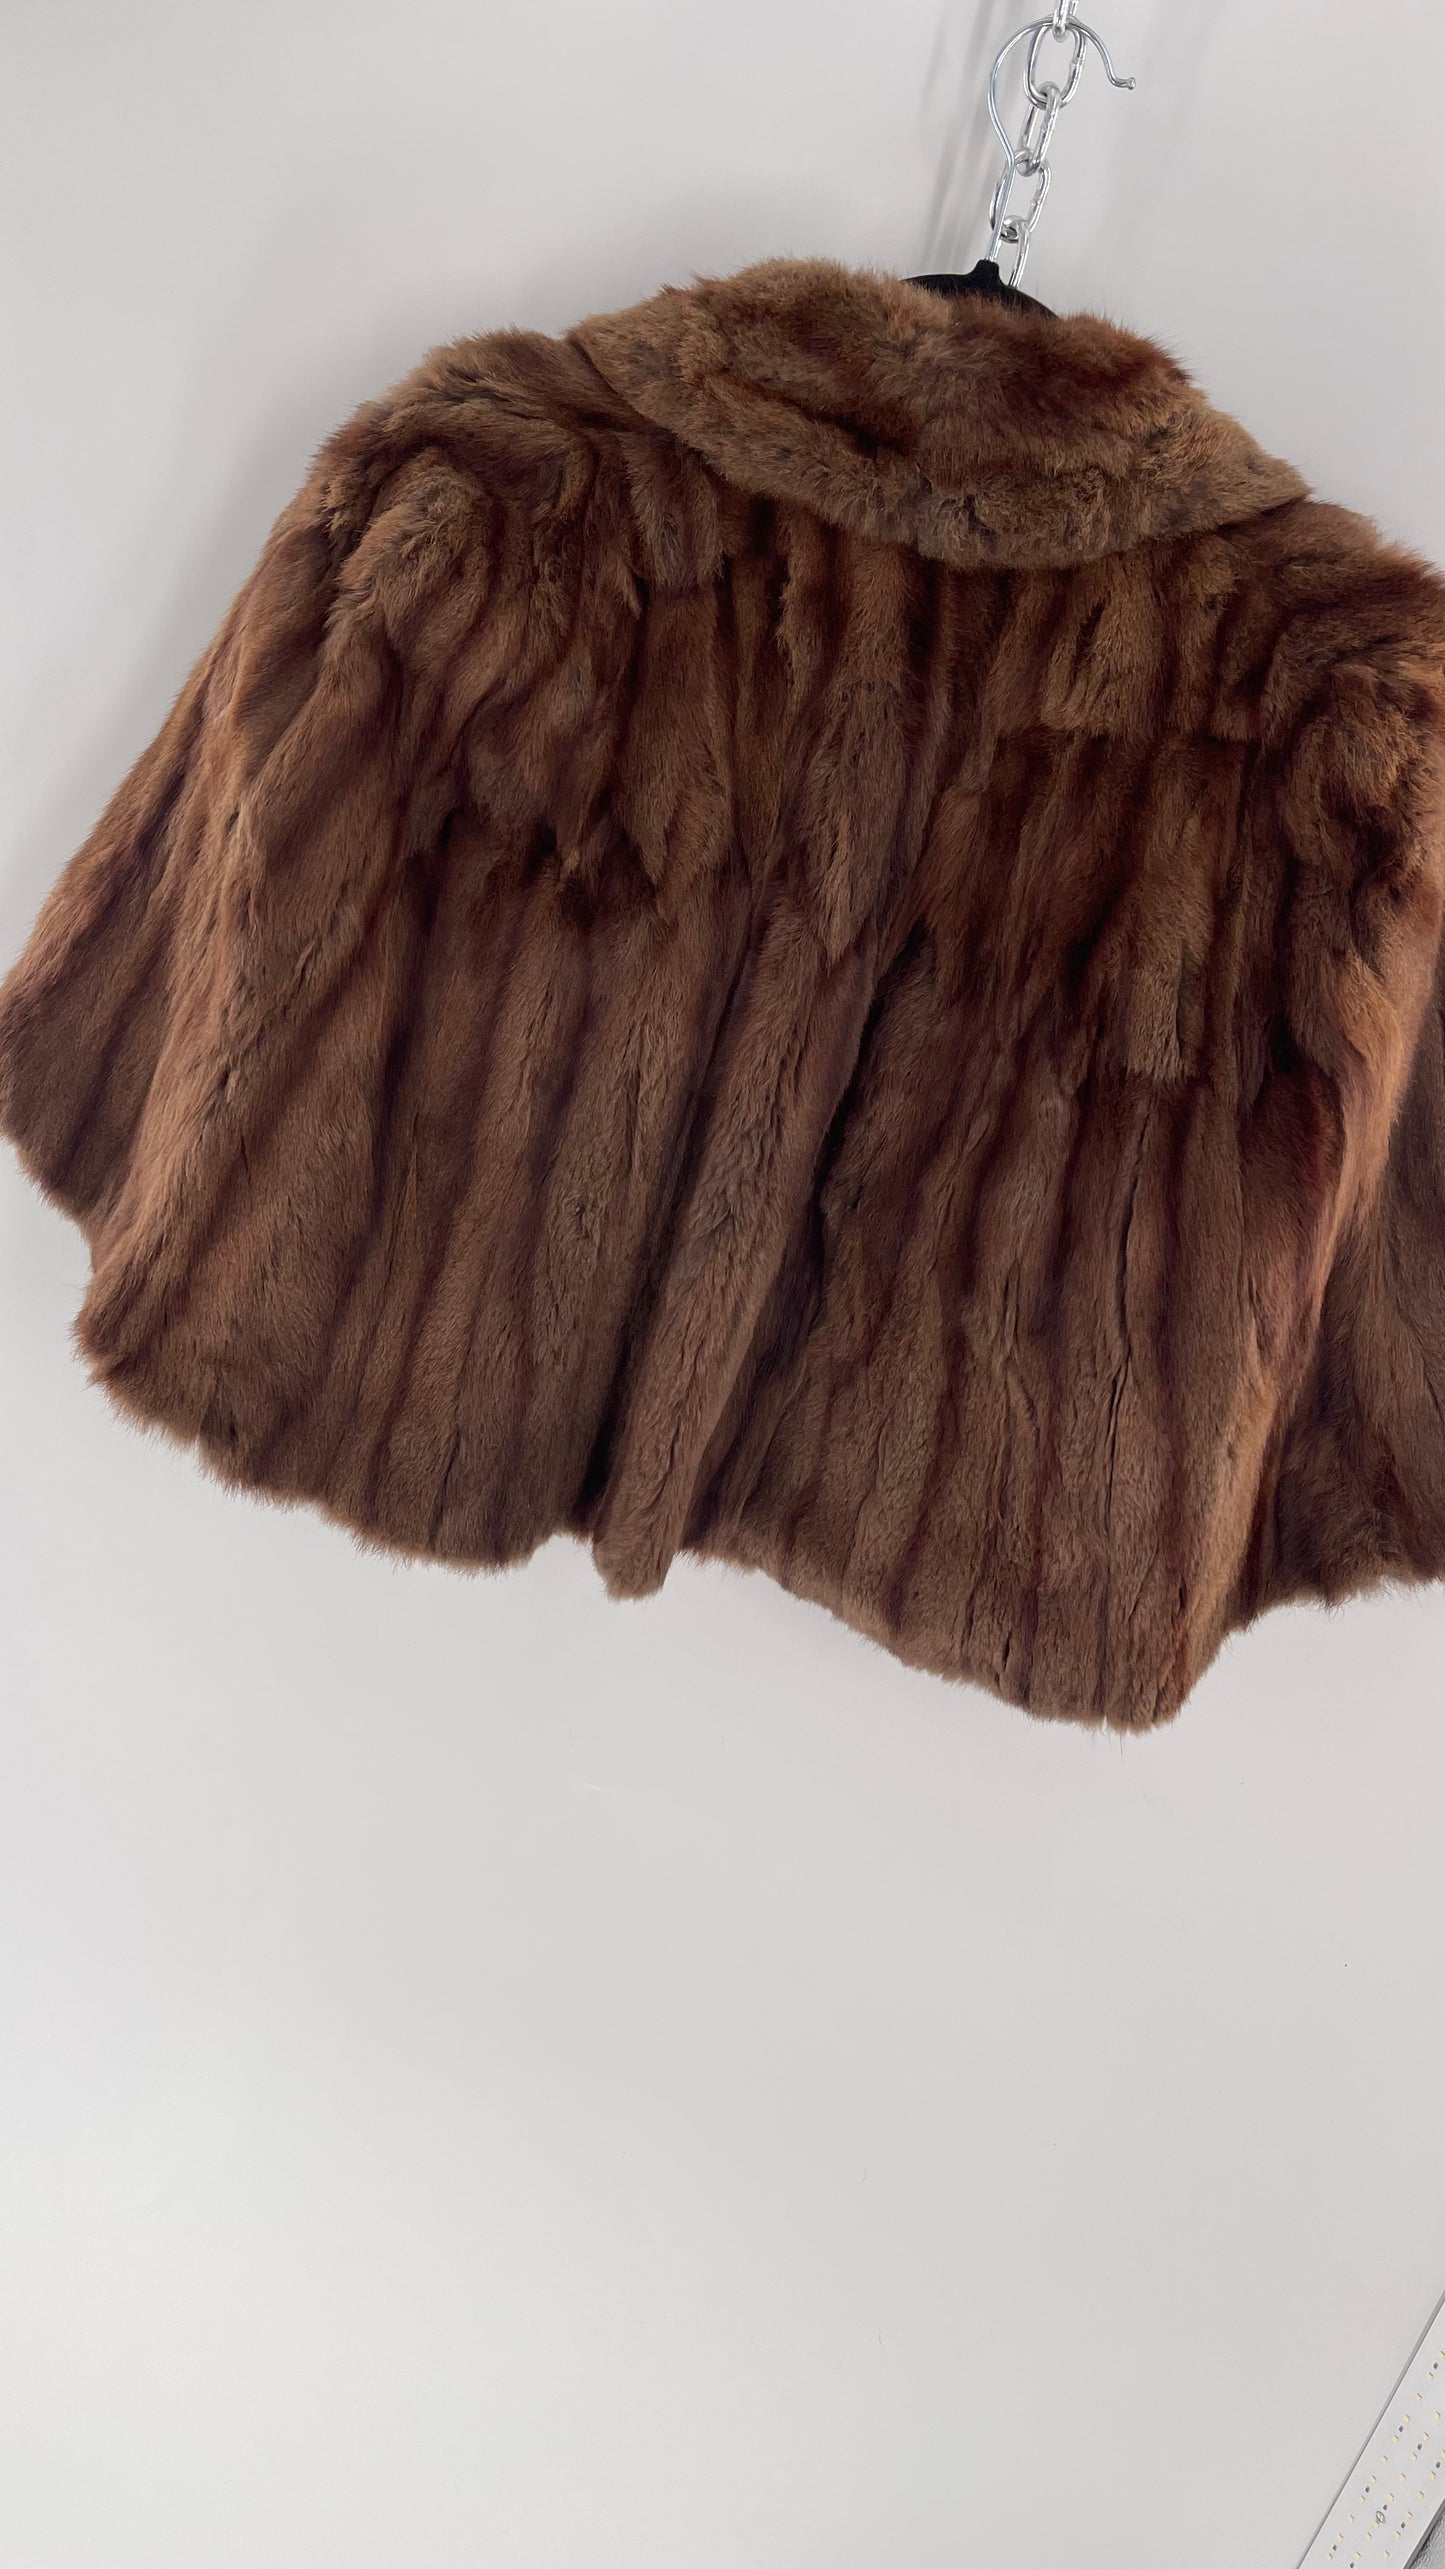 Vintage Brown Multi-toned Cape (One Size)